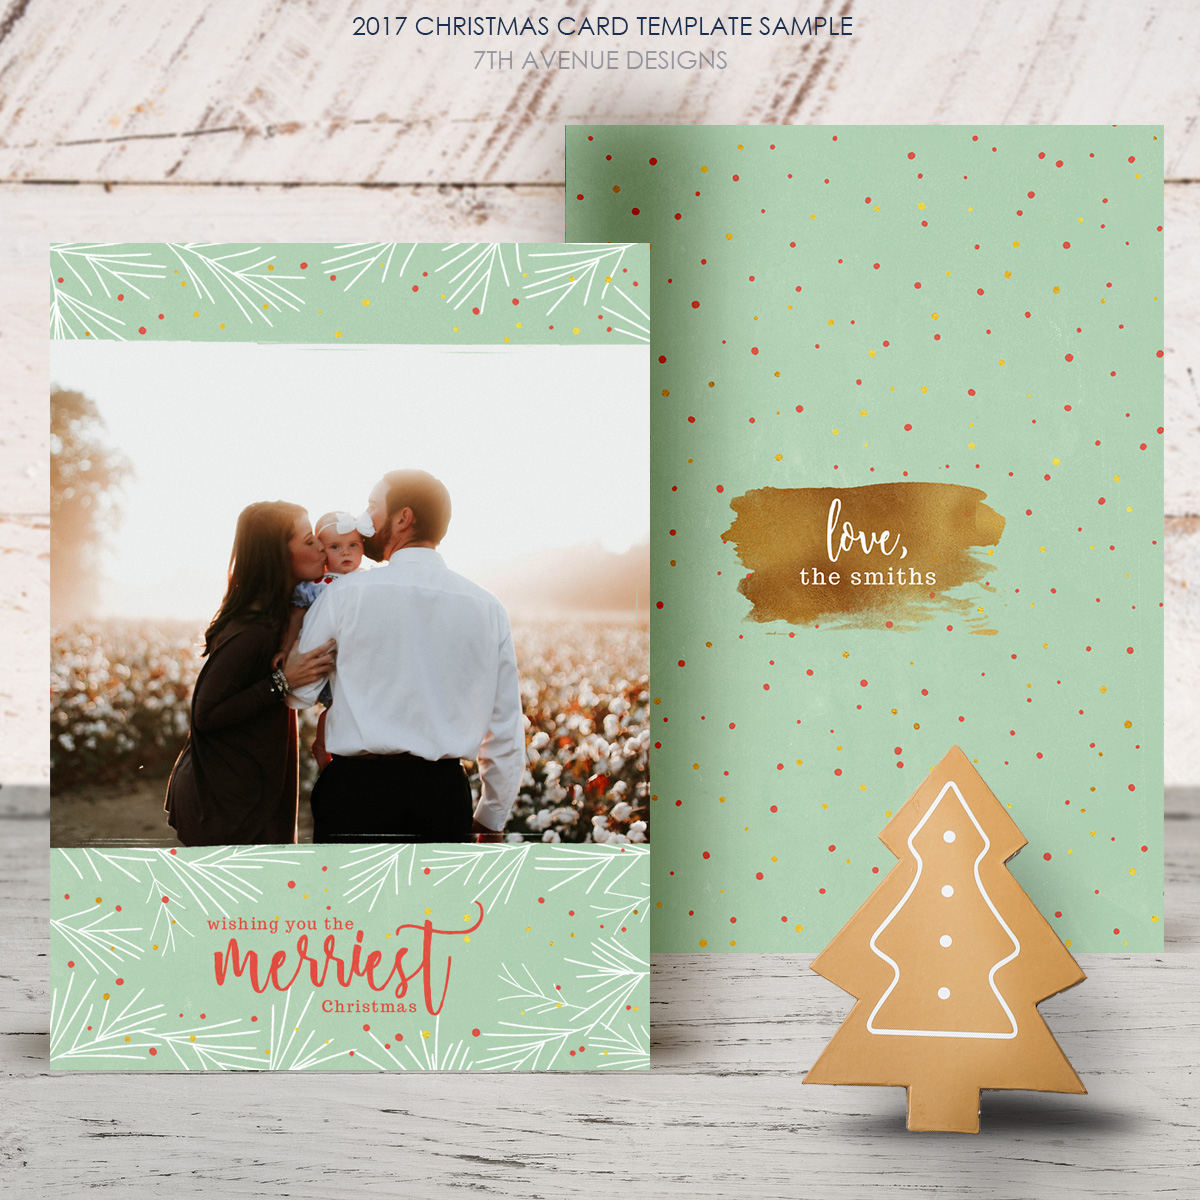 Free Christmas Card 2017 [Freecc2017] – It's Free With Free Christmas Card Templates For Photographers